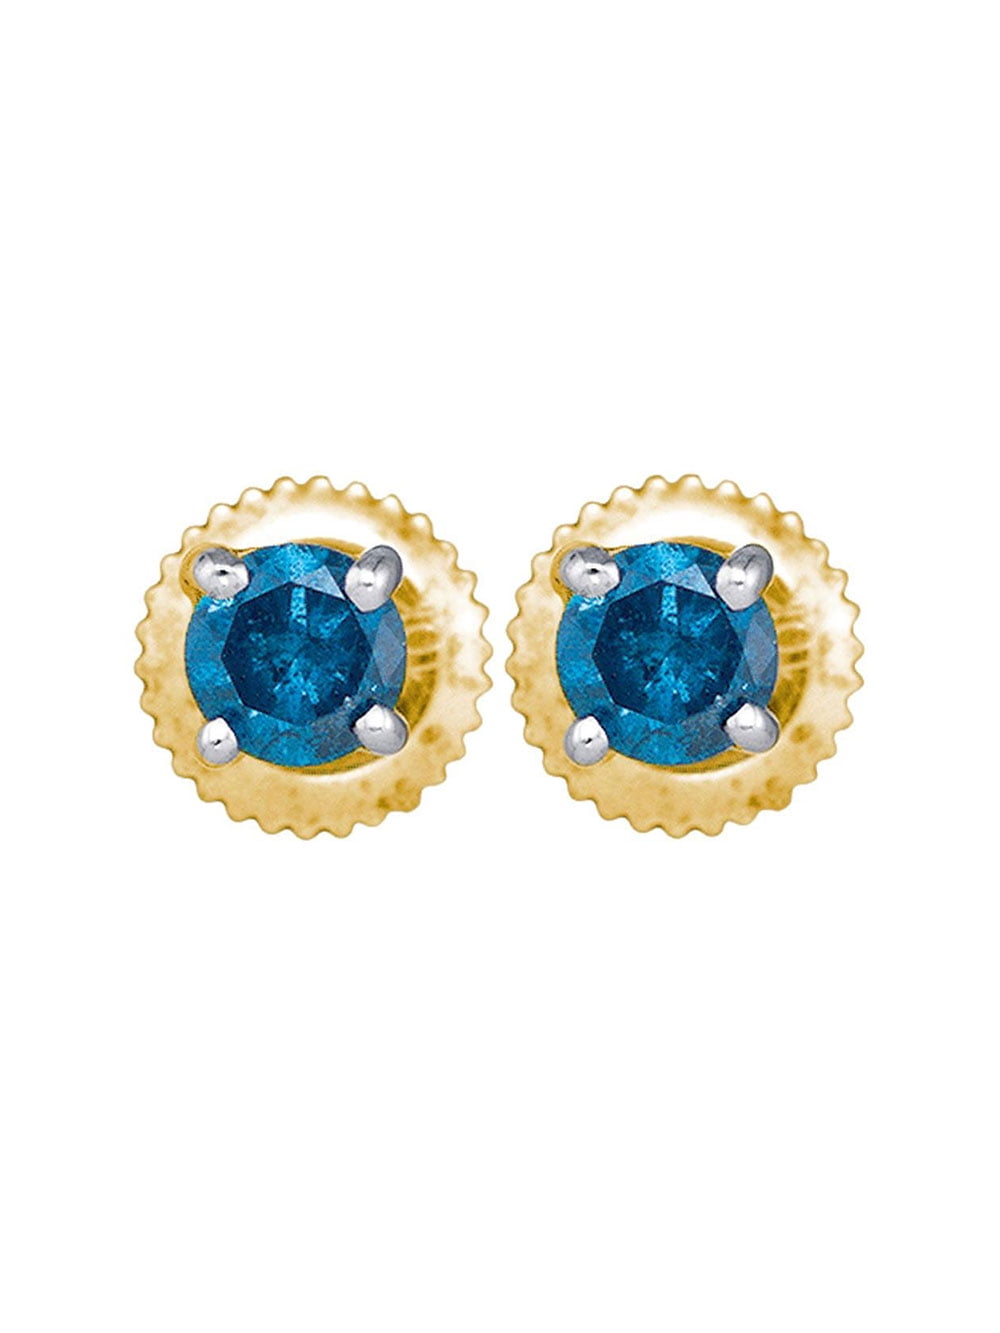 Jewel Tie Solid 10k Yellow Gold Round Blue Diamond Solitaire Stud Earrings 1/4 Cttw.